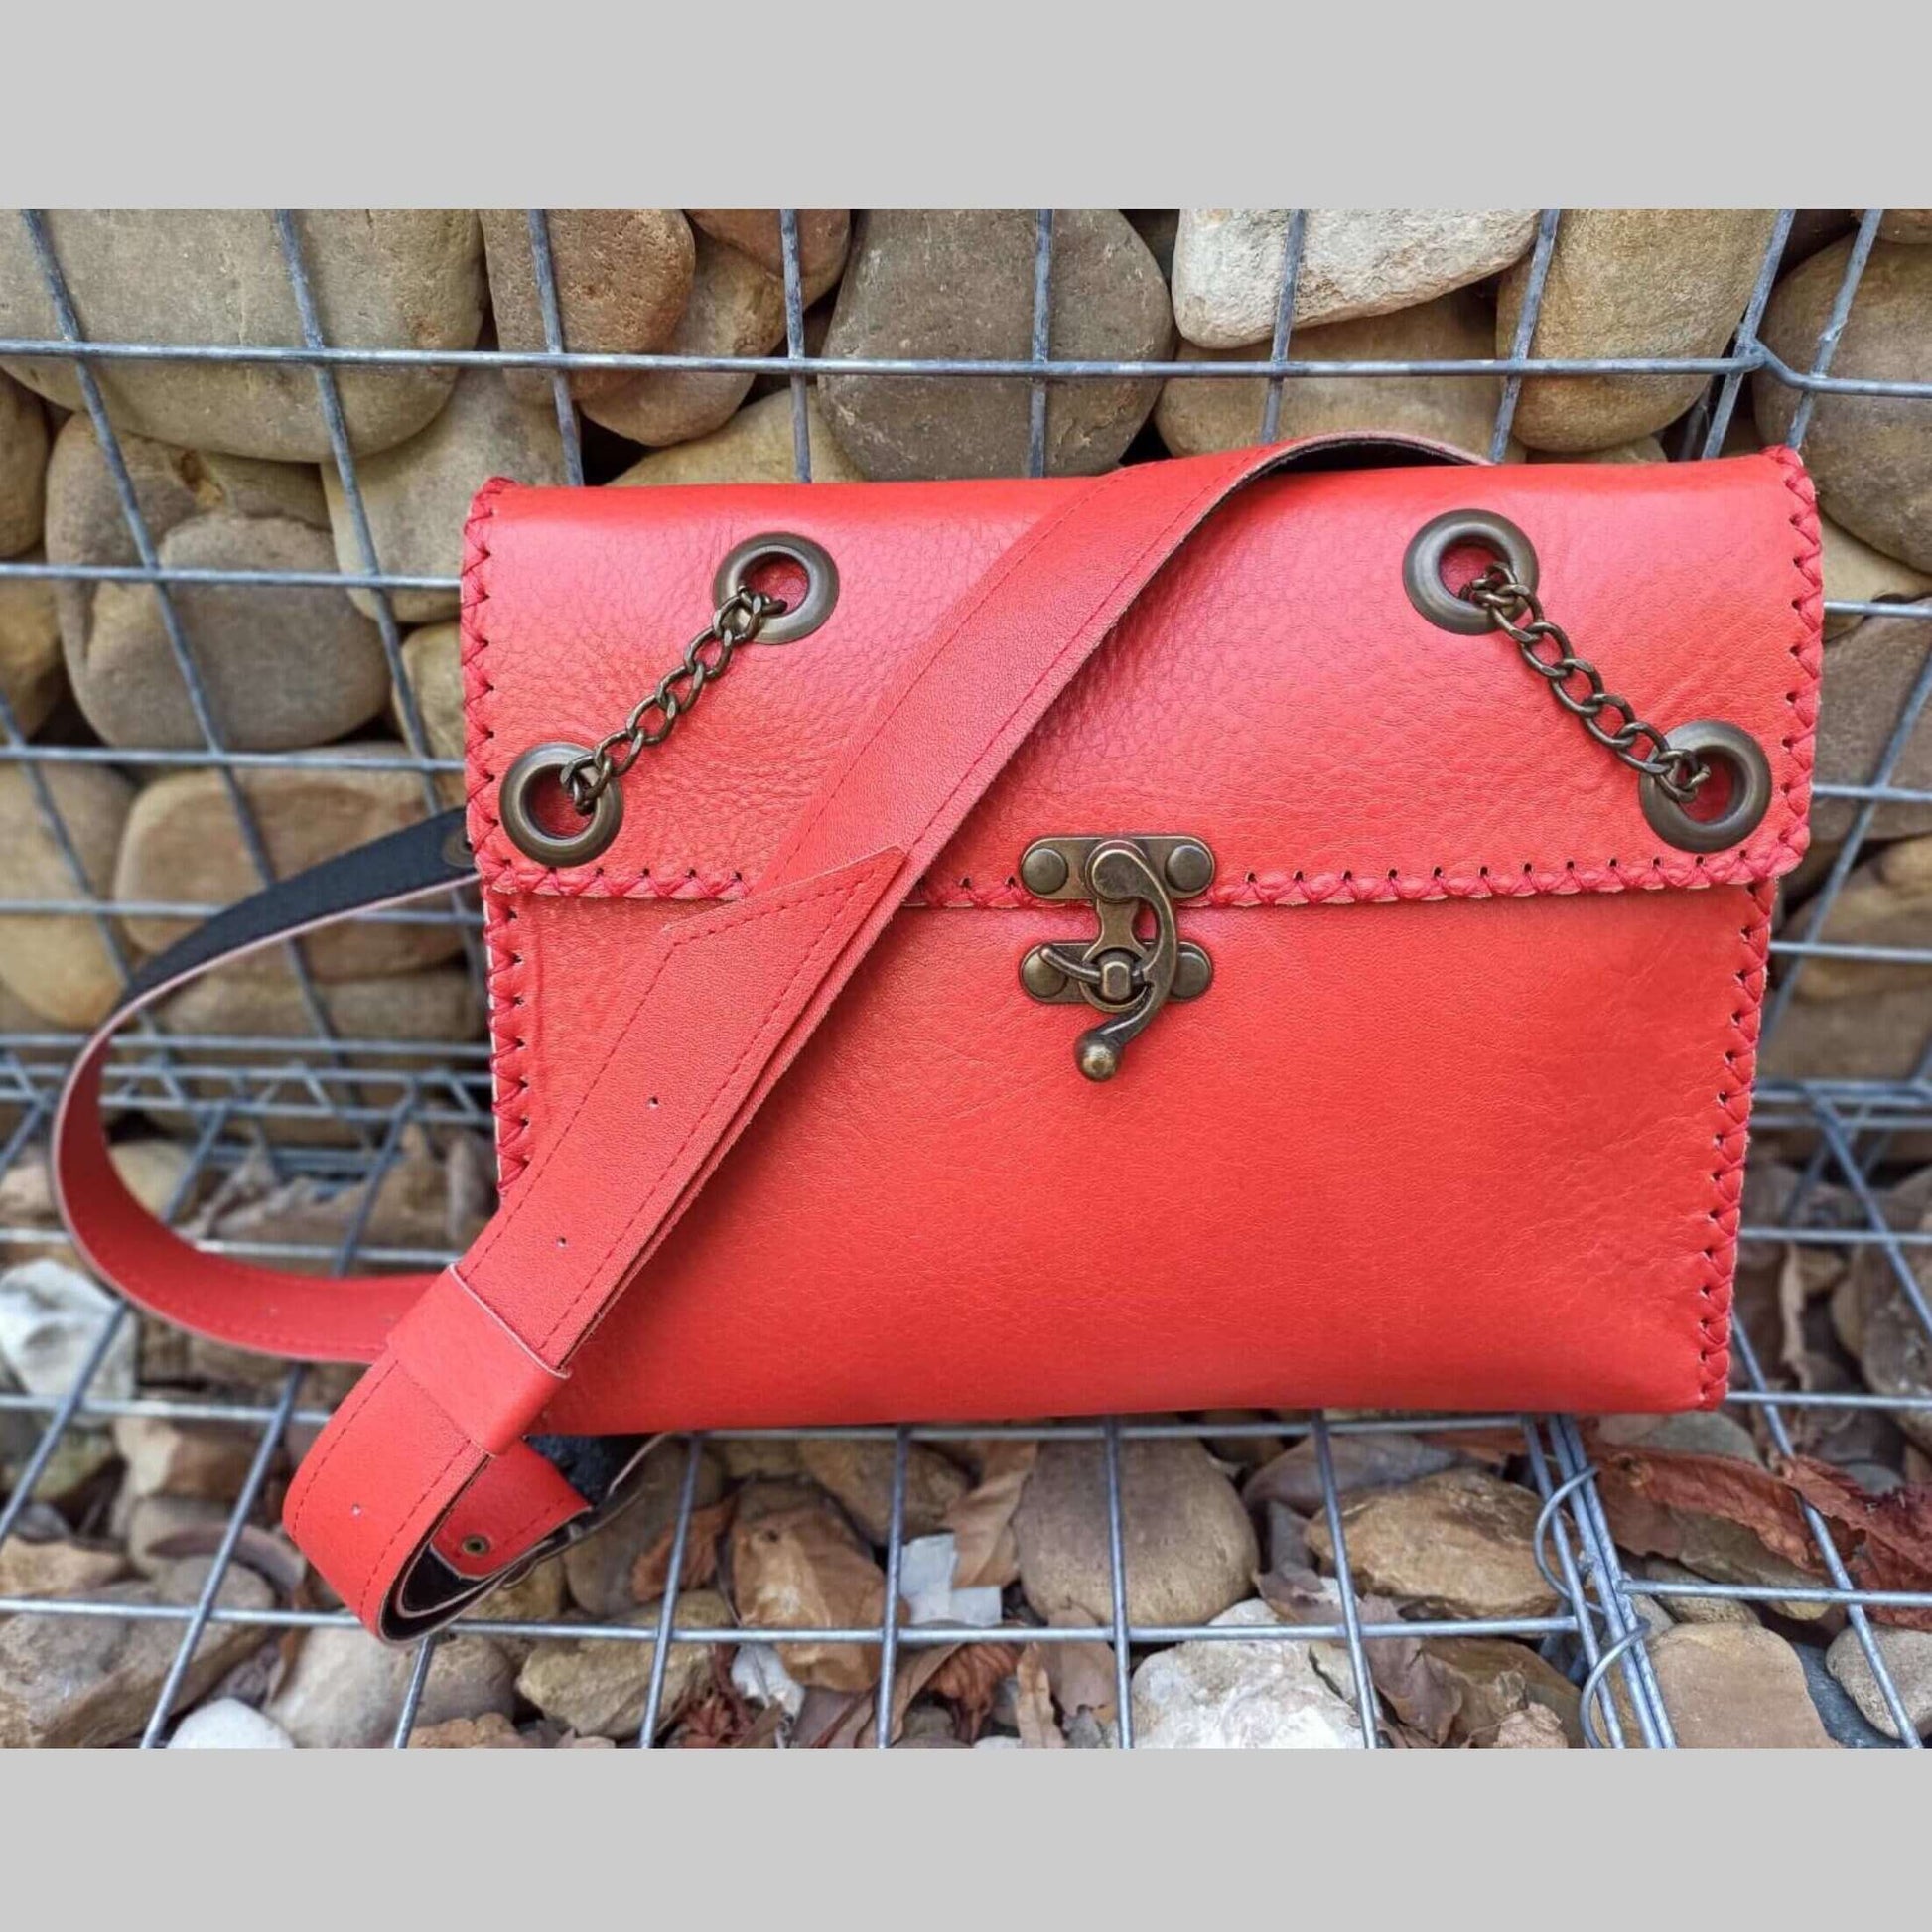 High Quality Red Leather Bag - Handmade clothing from AngelBySilvia - Top Designer Brands 